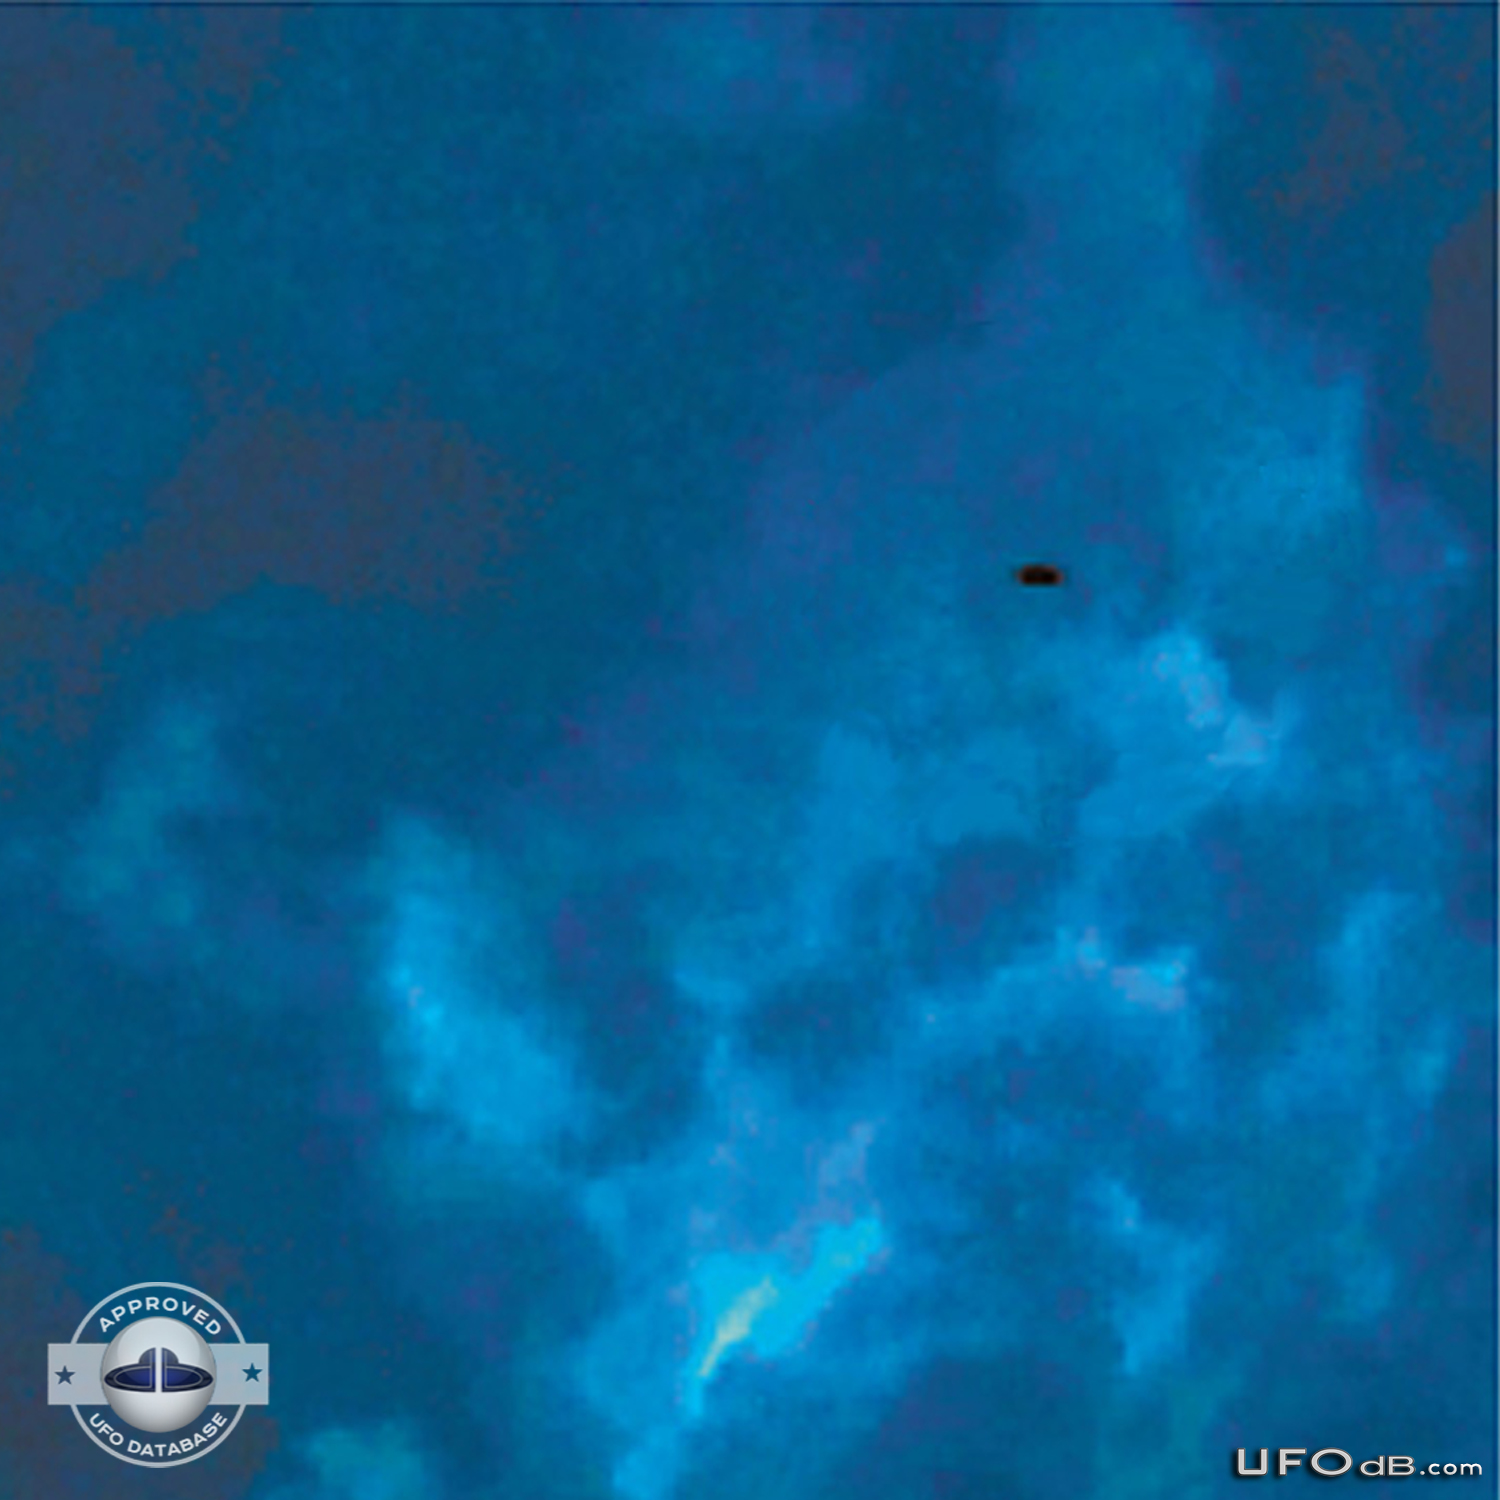 Dongguan Students get controversial UFO picture | China | May 11 2011 UFO Picture #289-3